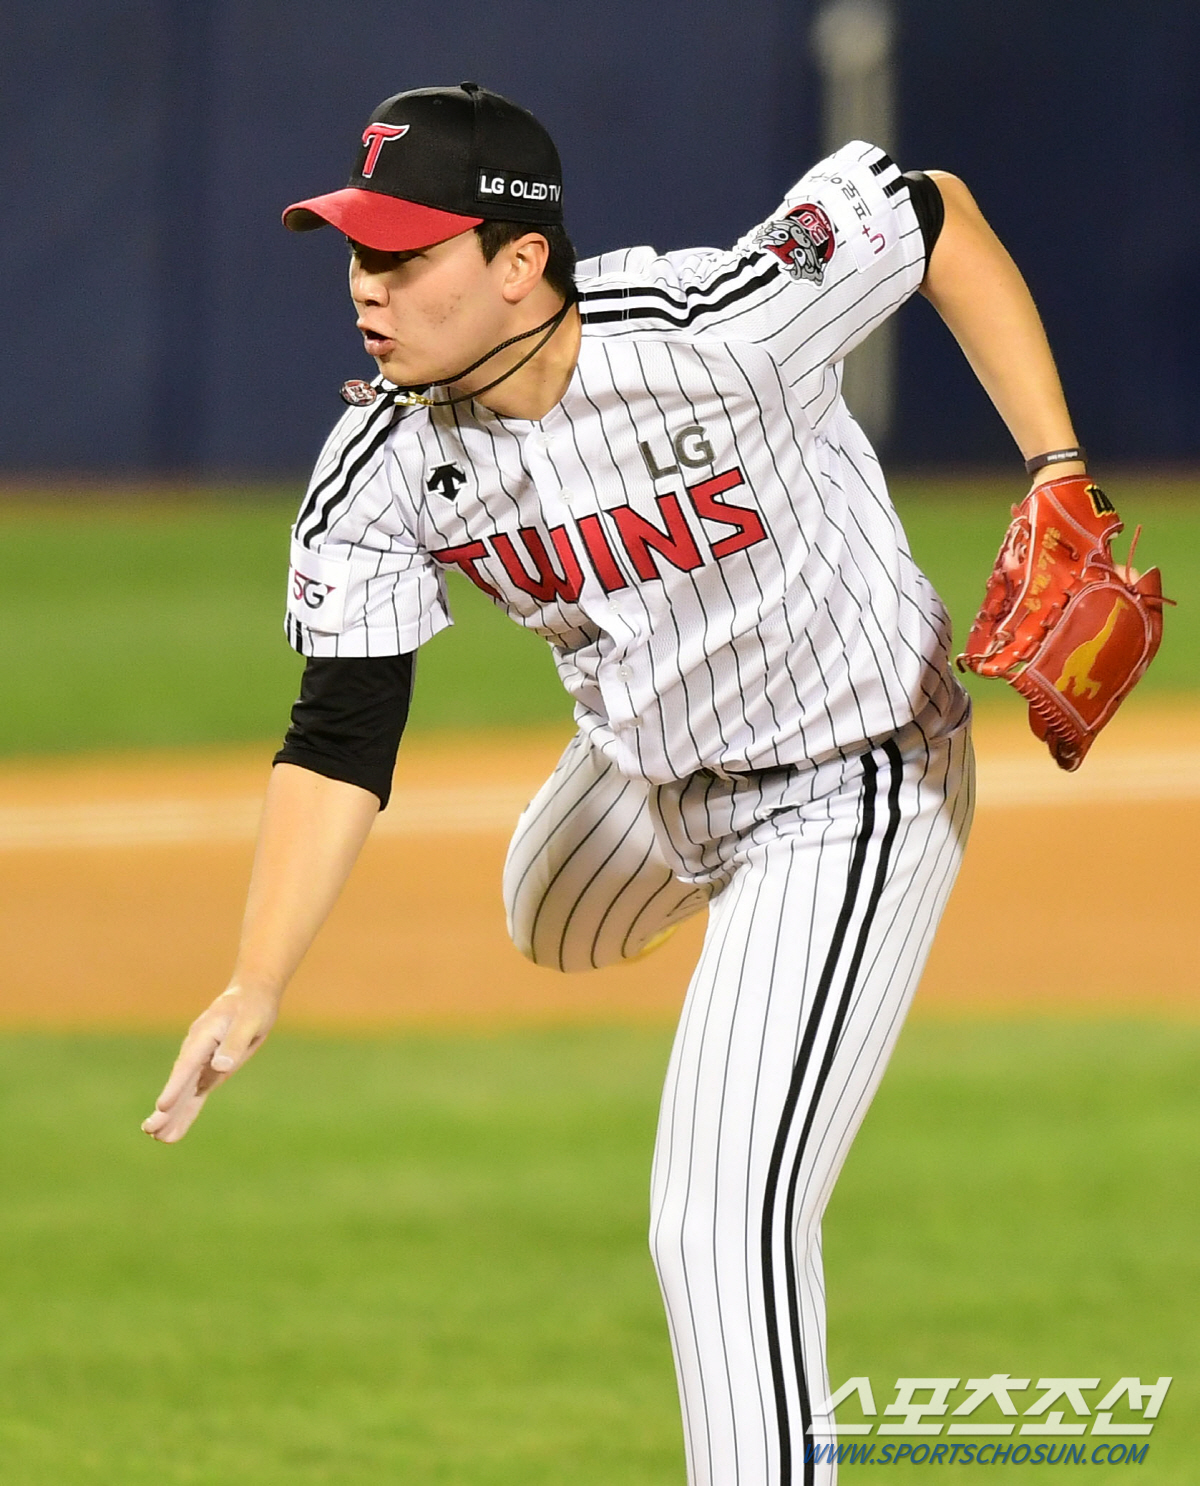 If the first game of the wild card decision is not played, the LG Twins will likely play Lee Min-ho as a starter in the second game.LG chose Pitcher Jeong Chan-Heon and Lee Min-ho as undead players in the first leg on the 2nd.On the day before the rain was canceled, Jeong Chan-Heon and Im Chan-kyu were undead players.LG coach Ryu Jung-il said in a briefing with Pre-match, Today, Chan-heon and Min-ho are not available. After the training, the conditioning part and the coaching staff discussed the condition and condition of the players. In conclusion, it is possible to interpret Lee Min-ho as Cole Hamels in preparation for the second game.Lee Min-hos most recent start was the Jamsil-dong Hanhwa Eagles match on the 28th of last month.He was on the mound as a relief after starting Im Chan-kyu at the time, allowing two runs (non-emissions) with two hits and two walks in 113 innings; he will be on the mound in six days after that.Lee Min-ho, along with Jeong Chan-Heon this season, played Rotation in a way that takes ten days off once he gets on the mound according to the Platoon 5 Selection system.2012 Korea Professional Baseball season 20 Kyonggi (selected 16 Kyonggi) threw 9723 innings to win 4-4 and record an Earned run average 3.69.LGs attention to Lee Min-ho is that it was a good season at the end.After the Hanhwa match on September 15, he lost only 1 without a victory in 7Kyonggi, but he was stable with an Earned run average of 1.65.In particular, he did his part by raising quality start in 4Kyonggi out of 5Kyonggi starting, and it is also noteworthy that he never made a start against Kiwoom this season.If you go to the second game, LG does not need to save the Pitcher.In addition to Lee Min-ho, he plans to put all possible pitchers such as starting agents Jin-chan-Heon and Im Chan-kyu.However, Ryu said, It is important that Kelly Clarkson, who is a starter today, is choreographed early.I want Kelly Clarkson to throw well because the next pitcher depends on the number of balls and the number of balls that Kelly Clarkson throws, and I want to win today. 